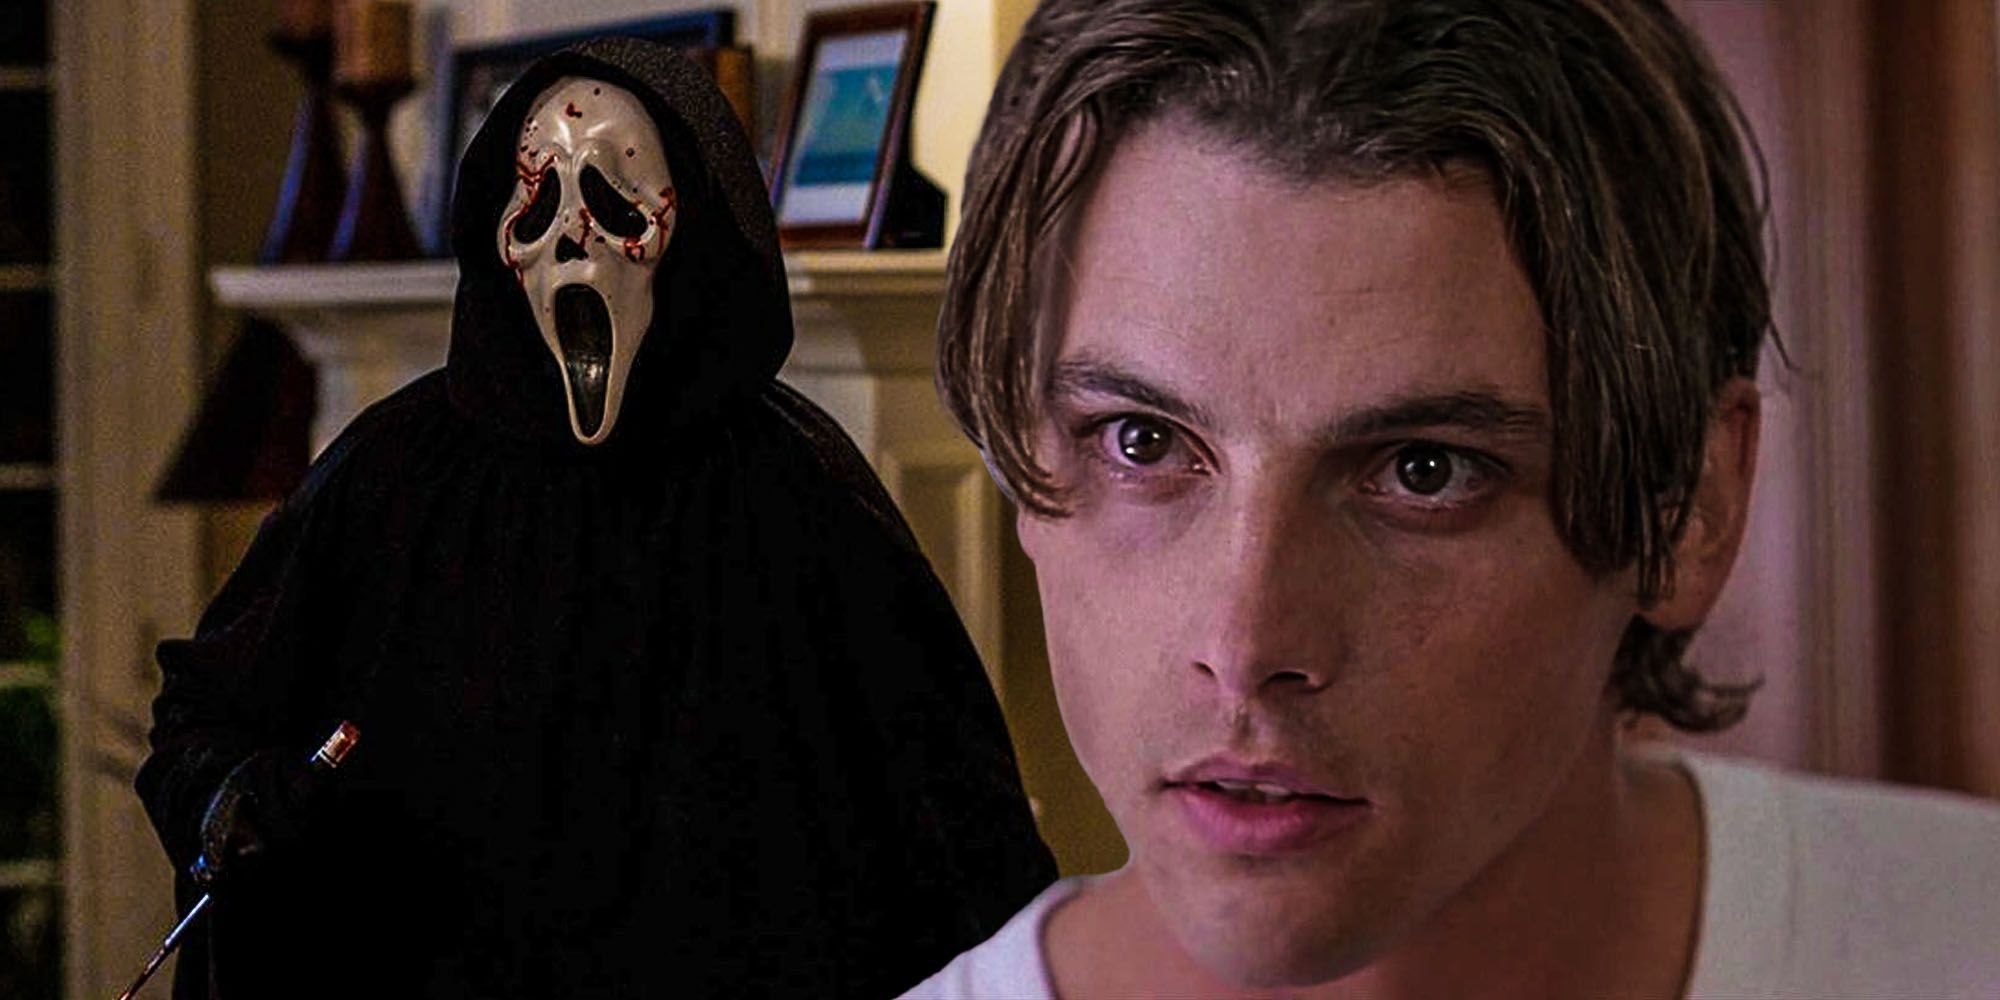 split image of Billy loomis and ghostface from scream